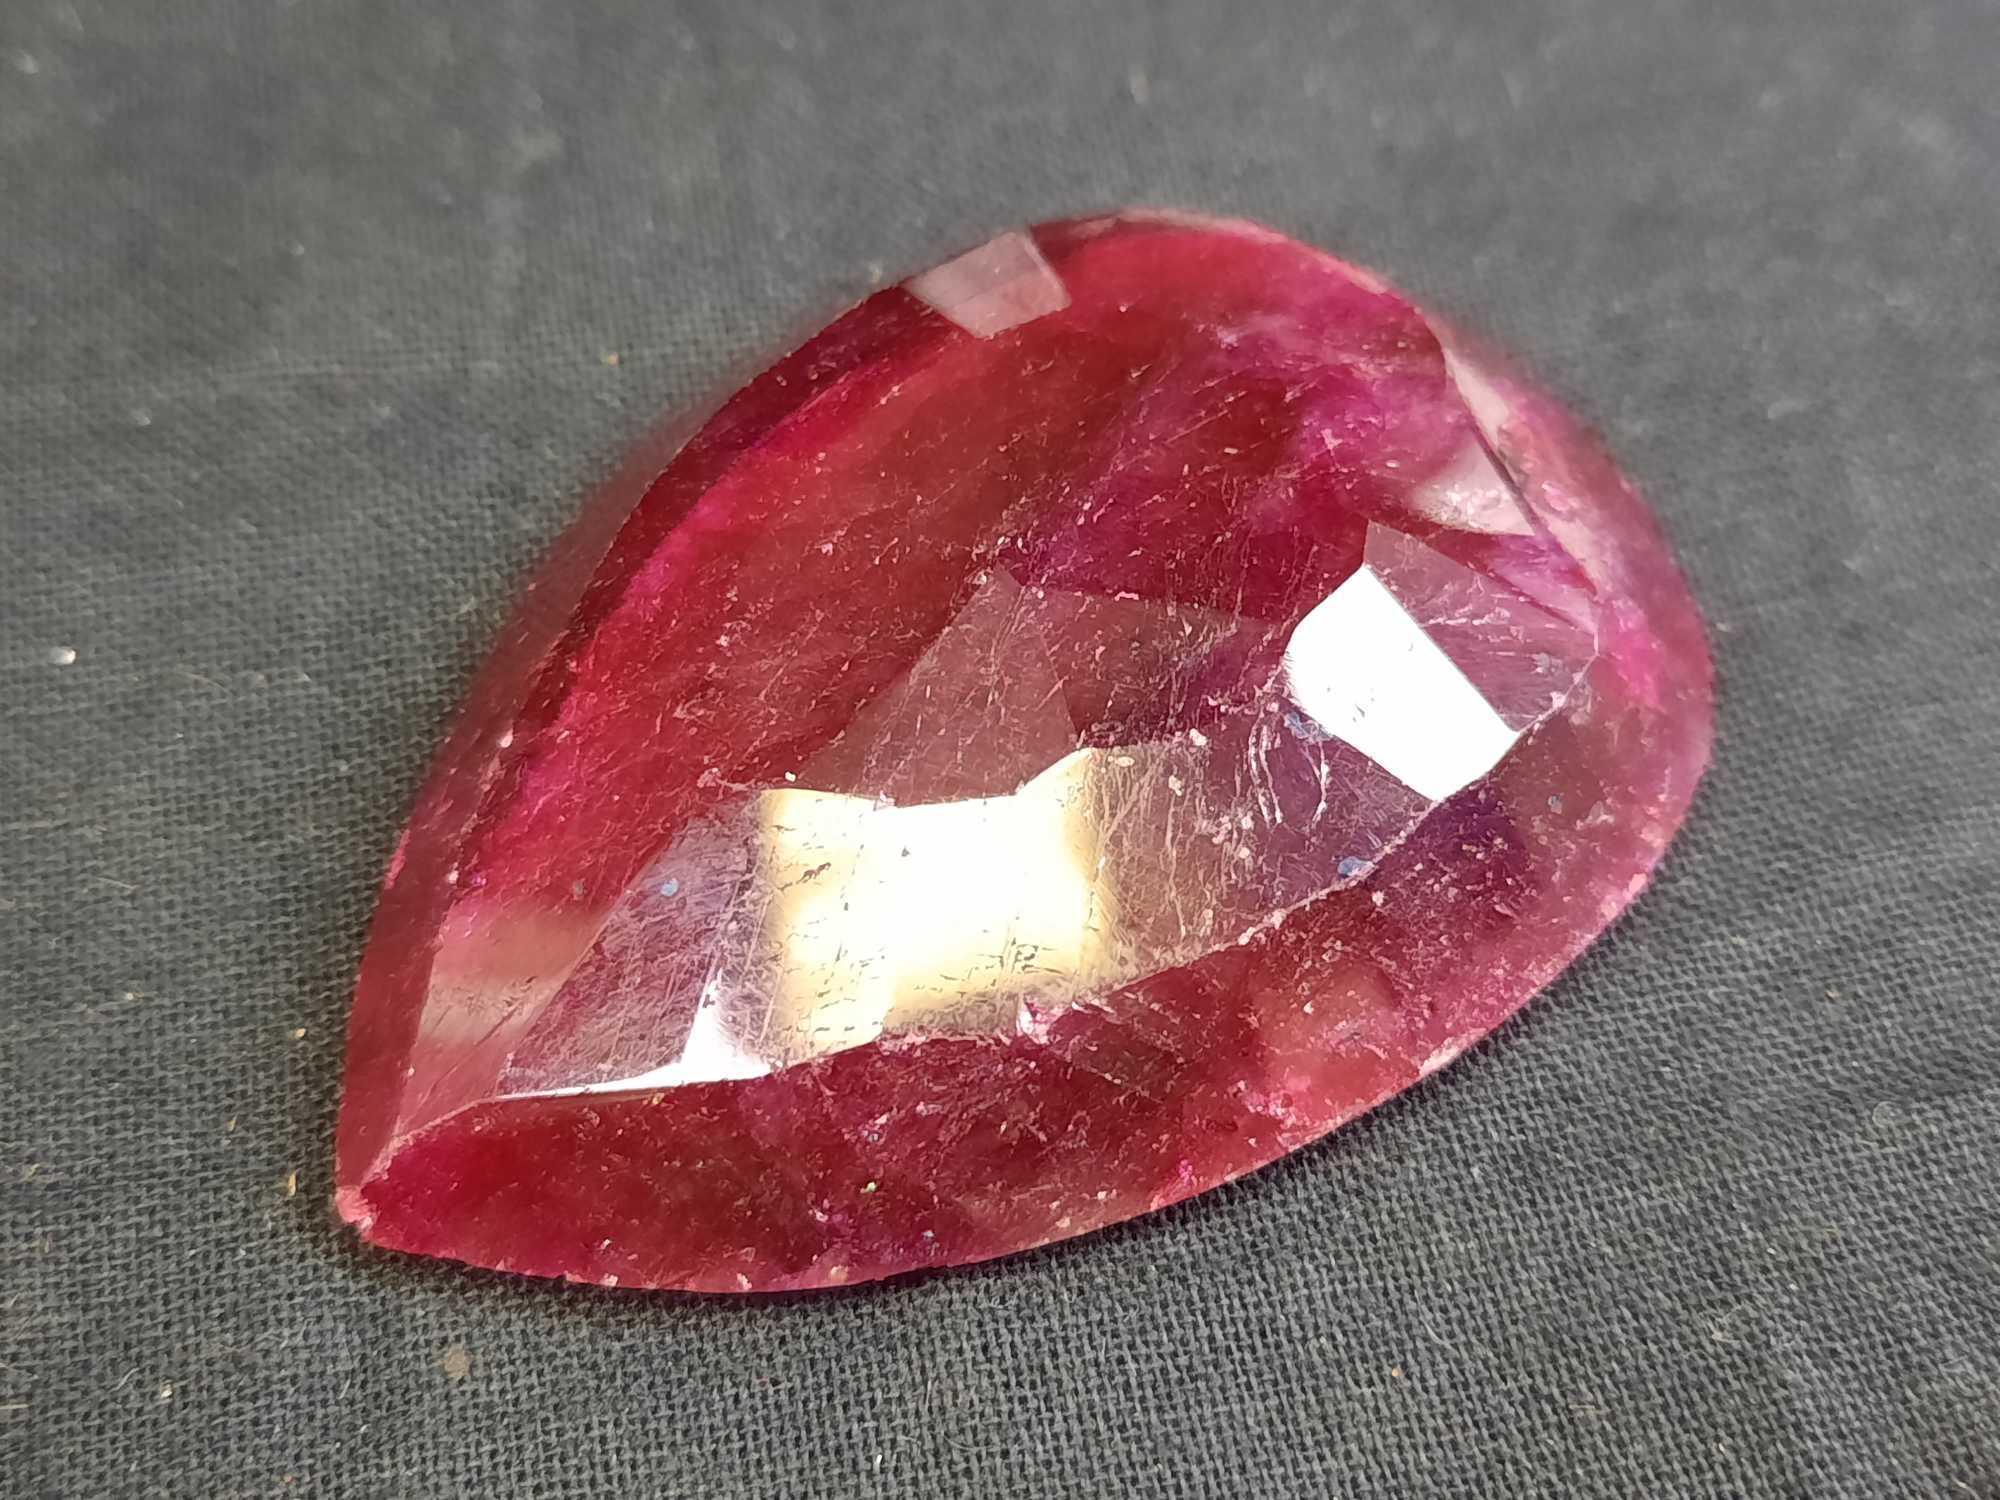 200+ ct Massive Blood Red Ruby Genuine Natural Mined Stone from Madagascar Pear Cut 2in Length